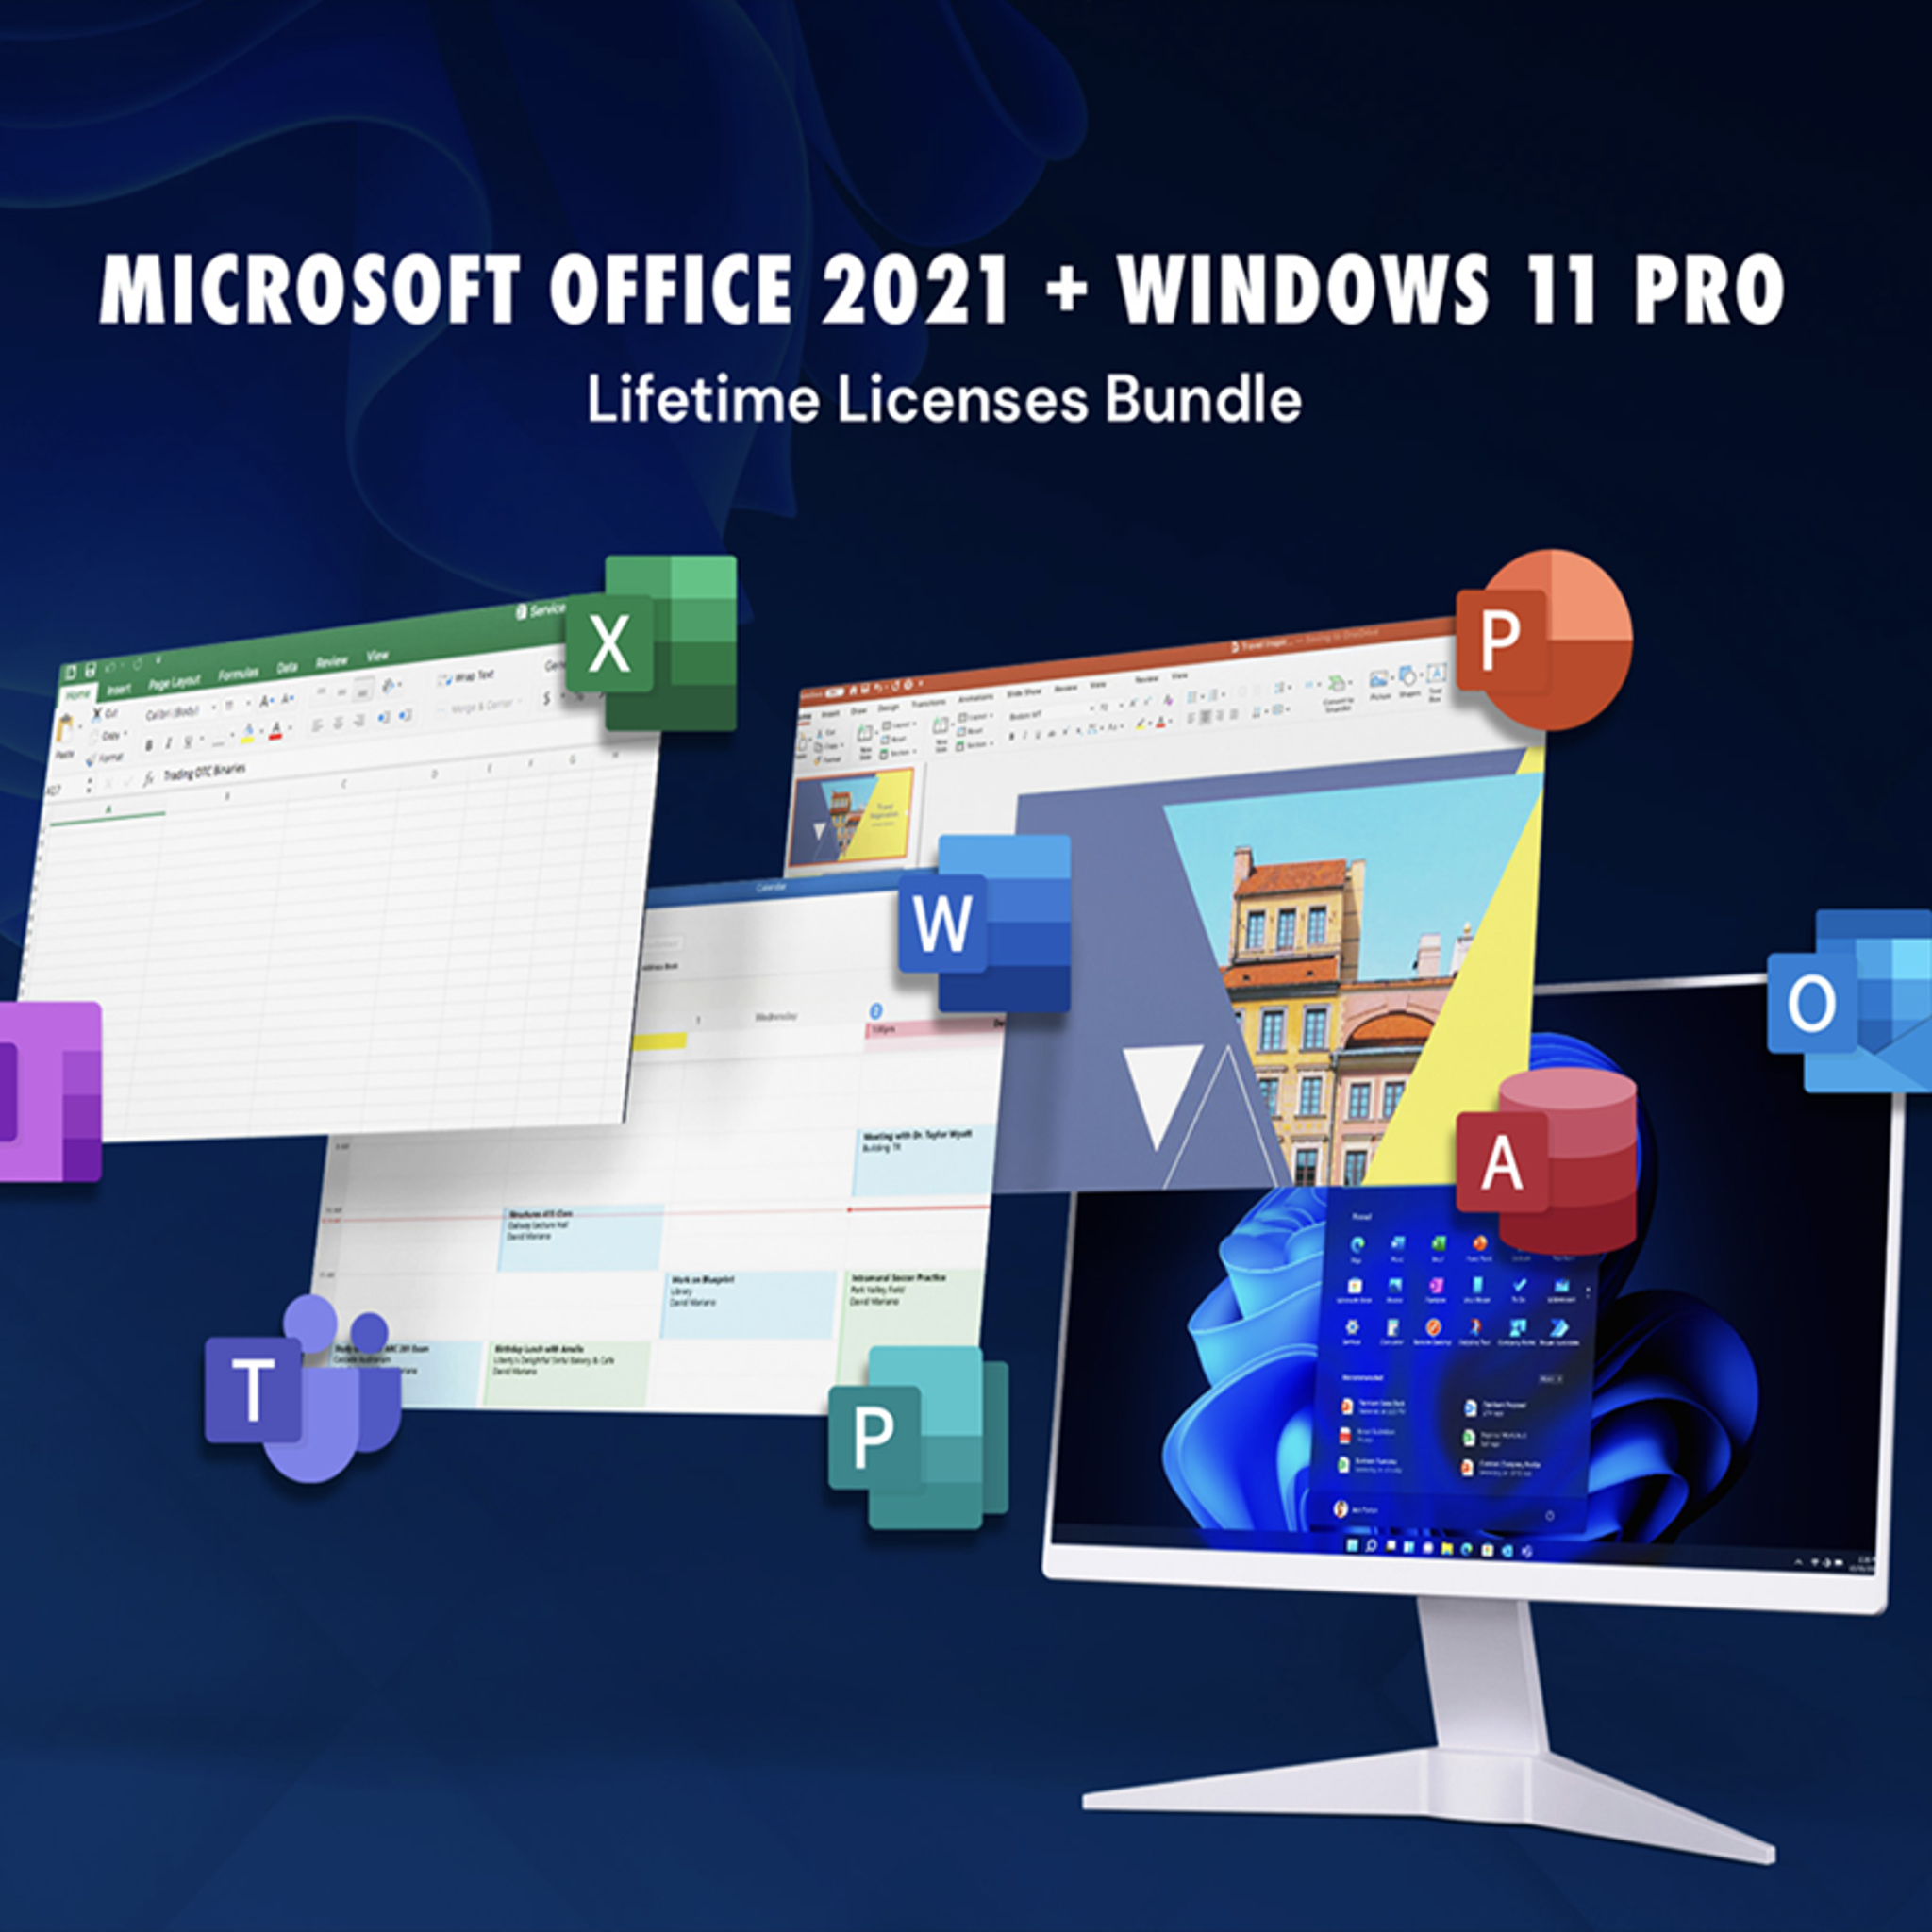 Last chance: Upgrade to Windows 11 Pro and Microsoft Office Pro